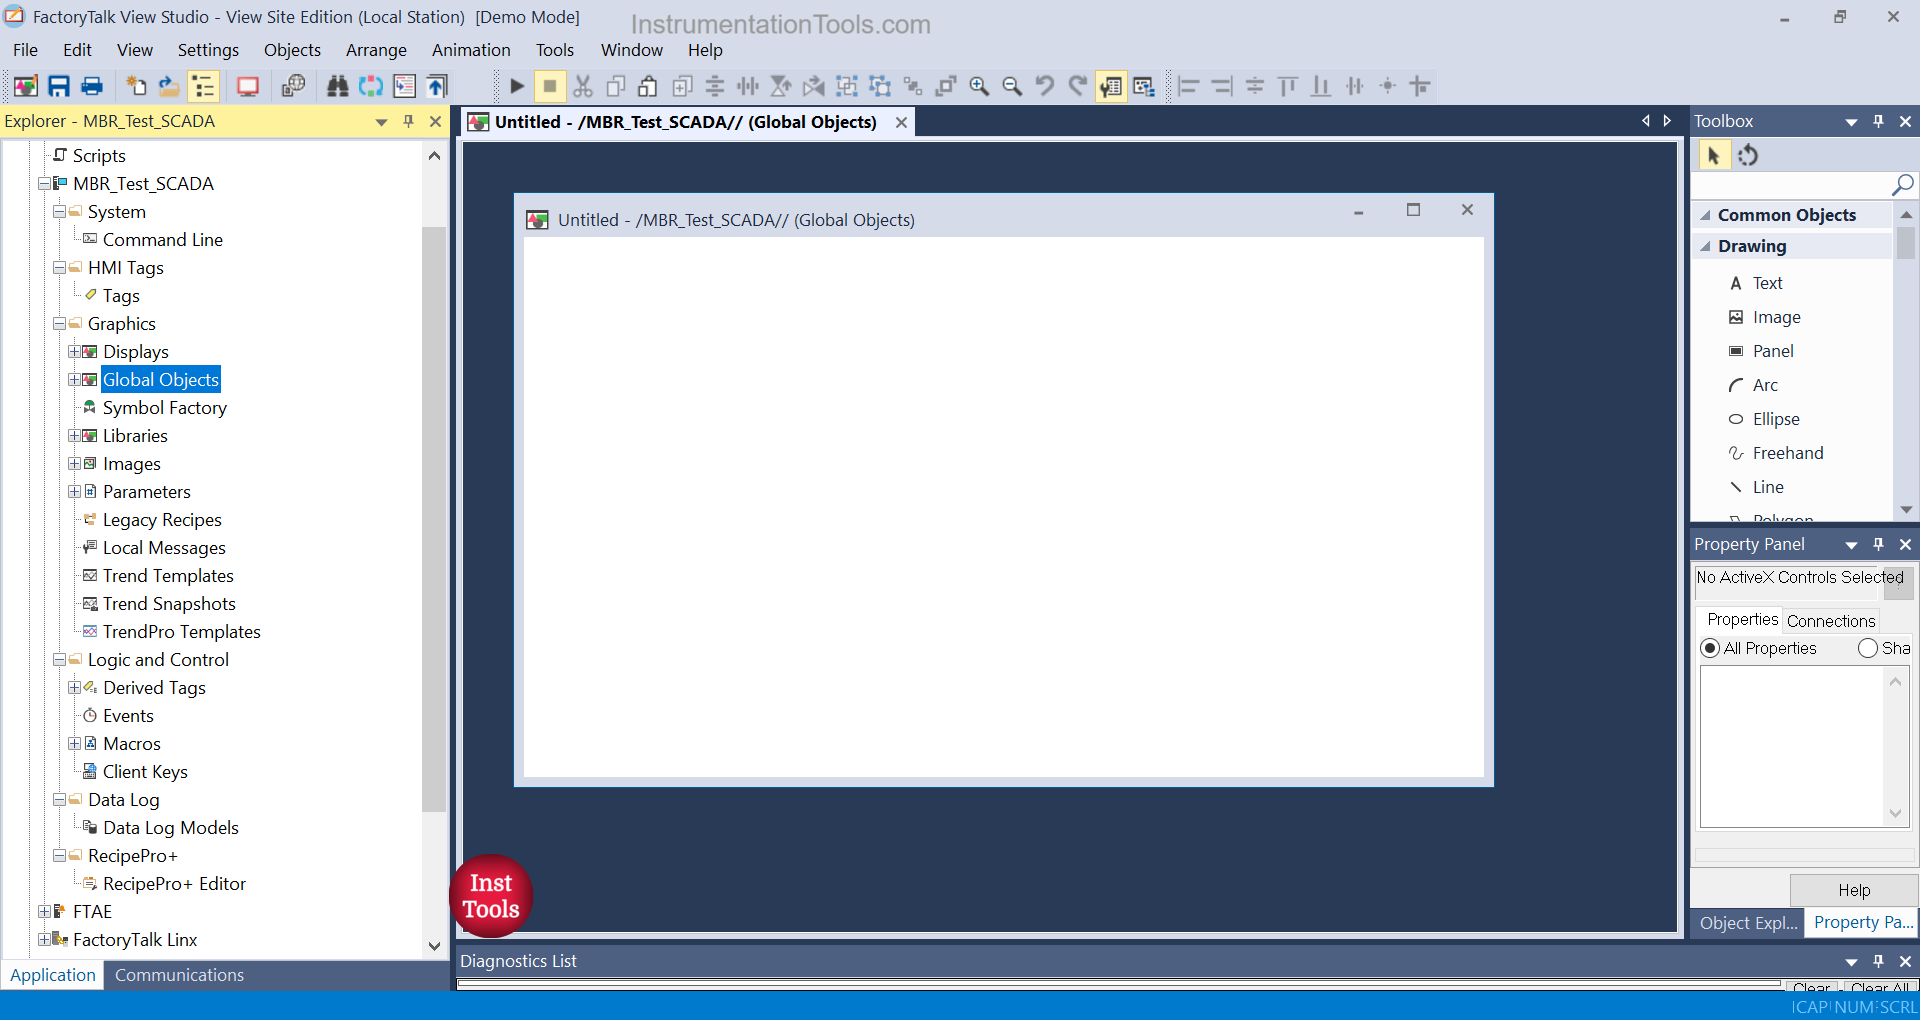 How to Create Templates in FactoryTalk View Studio